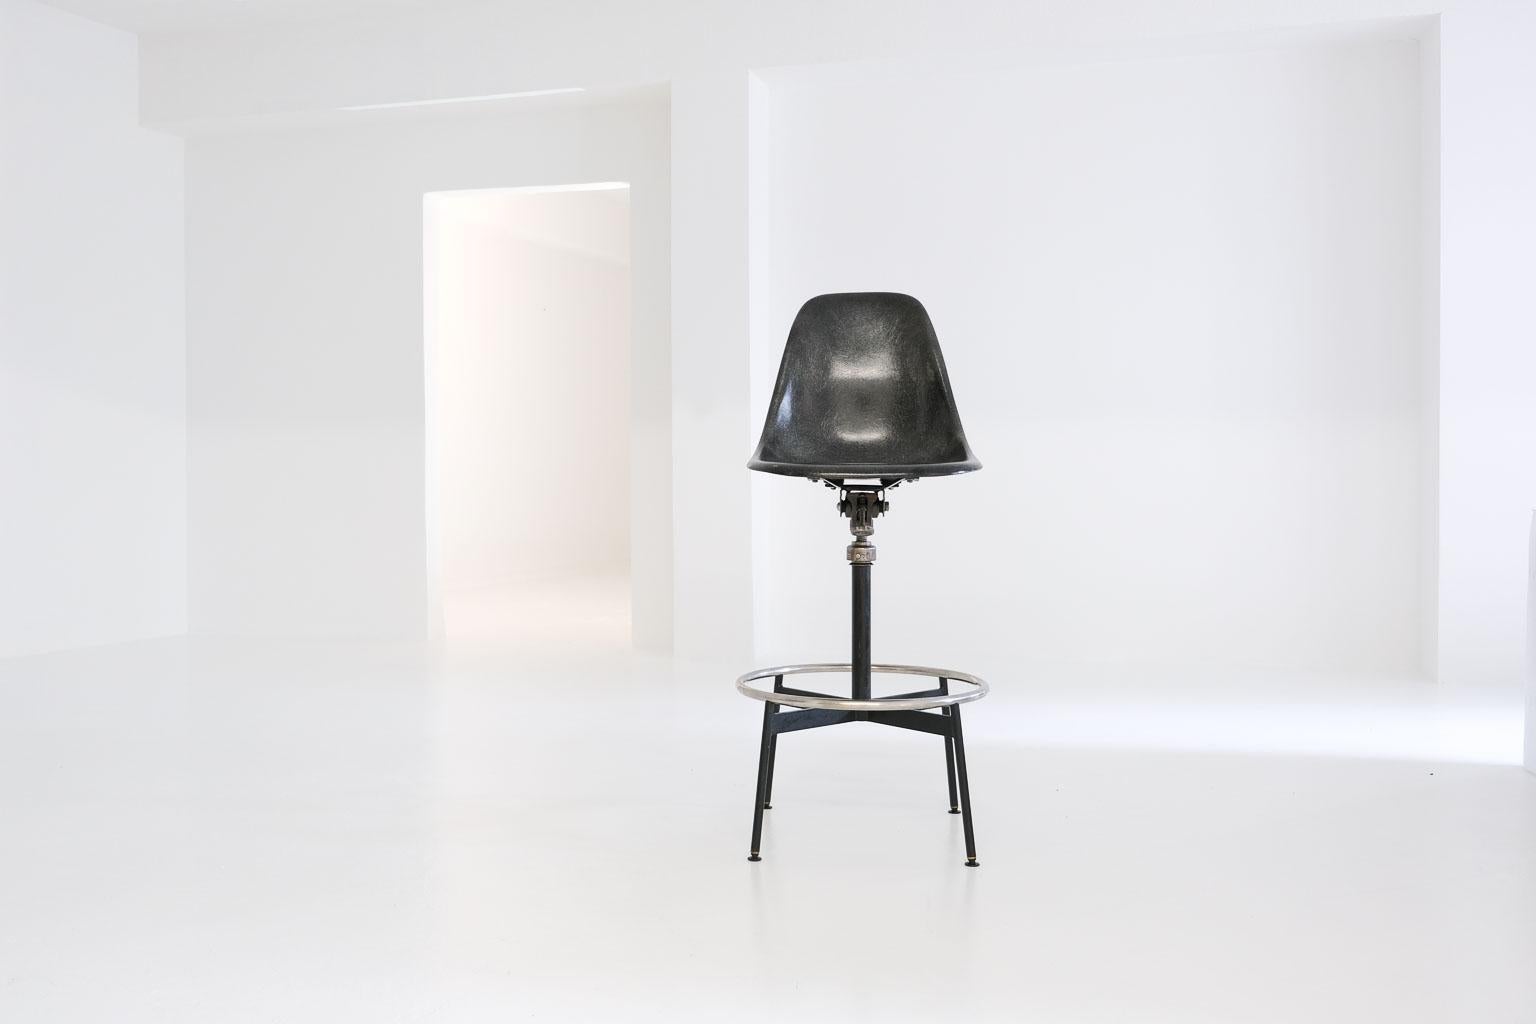 eames‘ plasticchairs are omnipresent nowadays: practical, good-looking and loved by everyone. but when you’re not „everyone“ and would like to insert something special into your interior, here we’ve got a striking discovery: a drafting chair. black